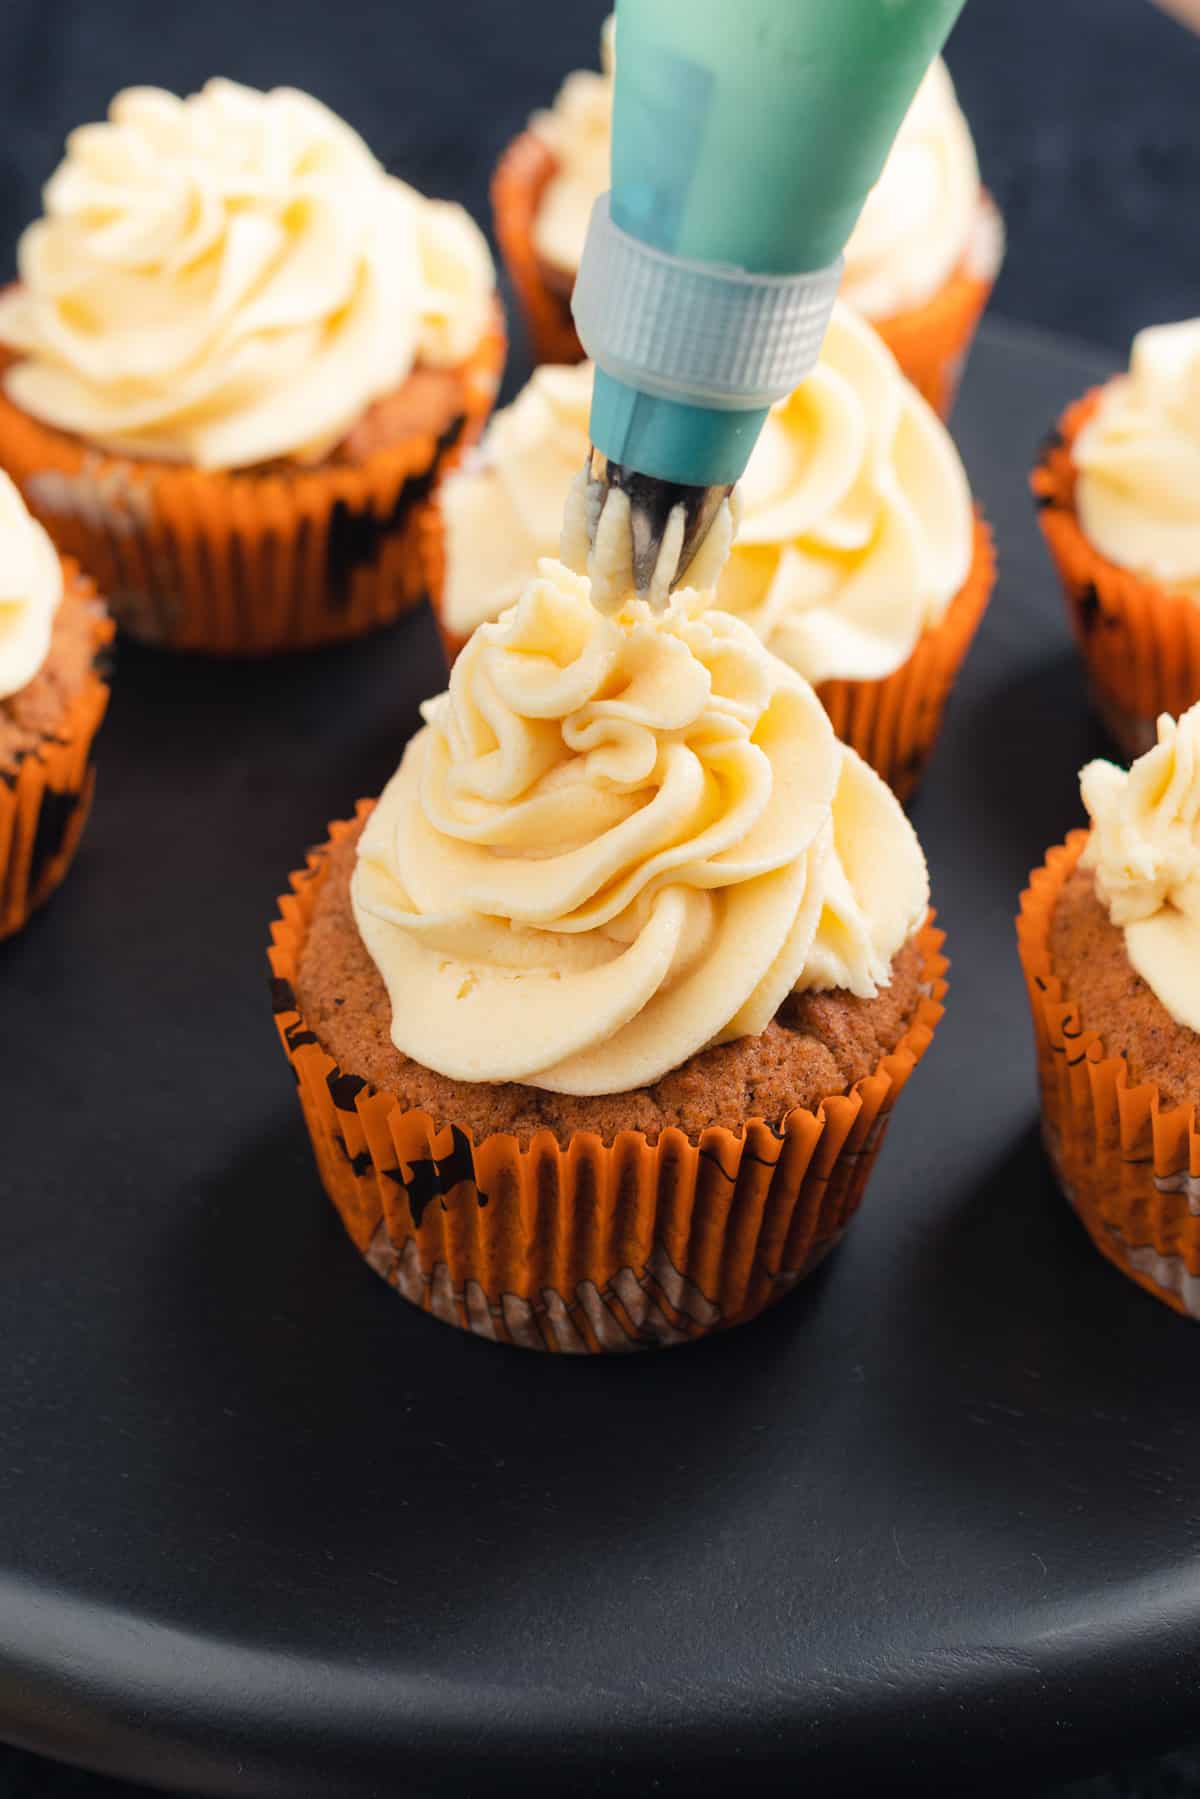 frosting a spiced cupcake with cream cheese frosting